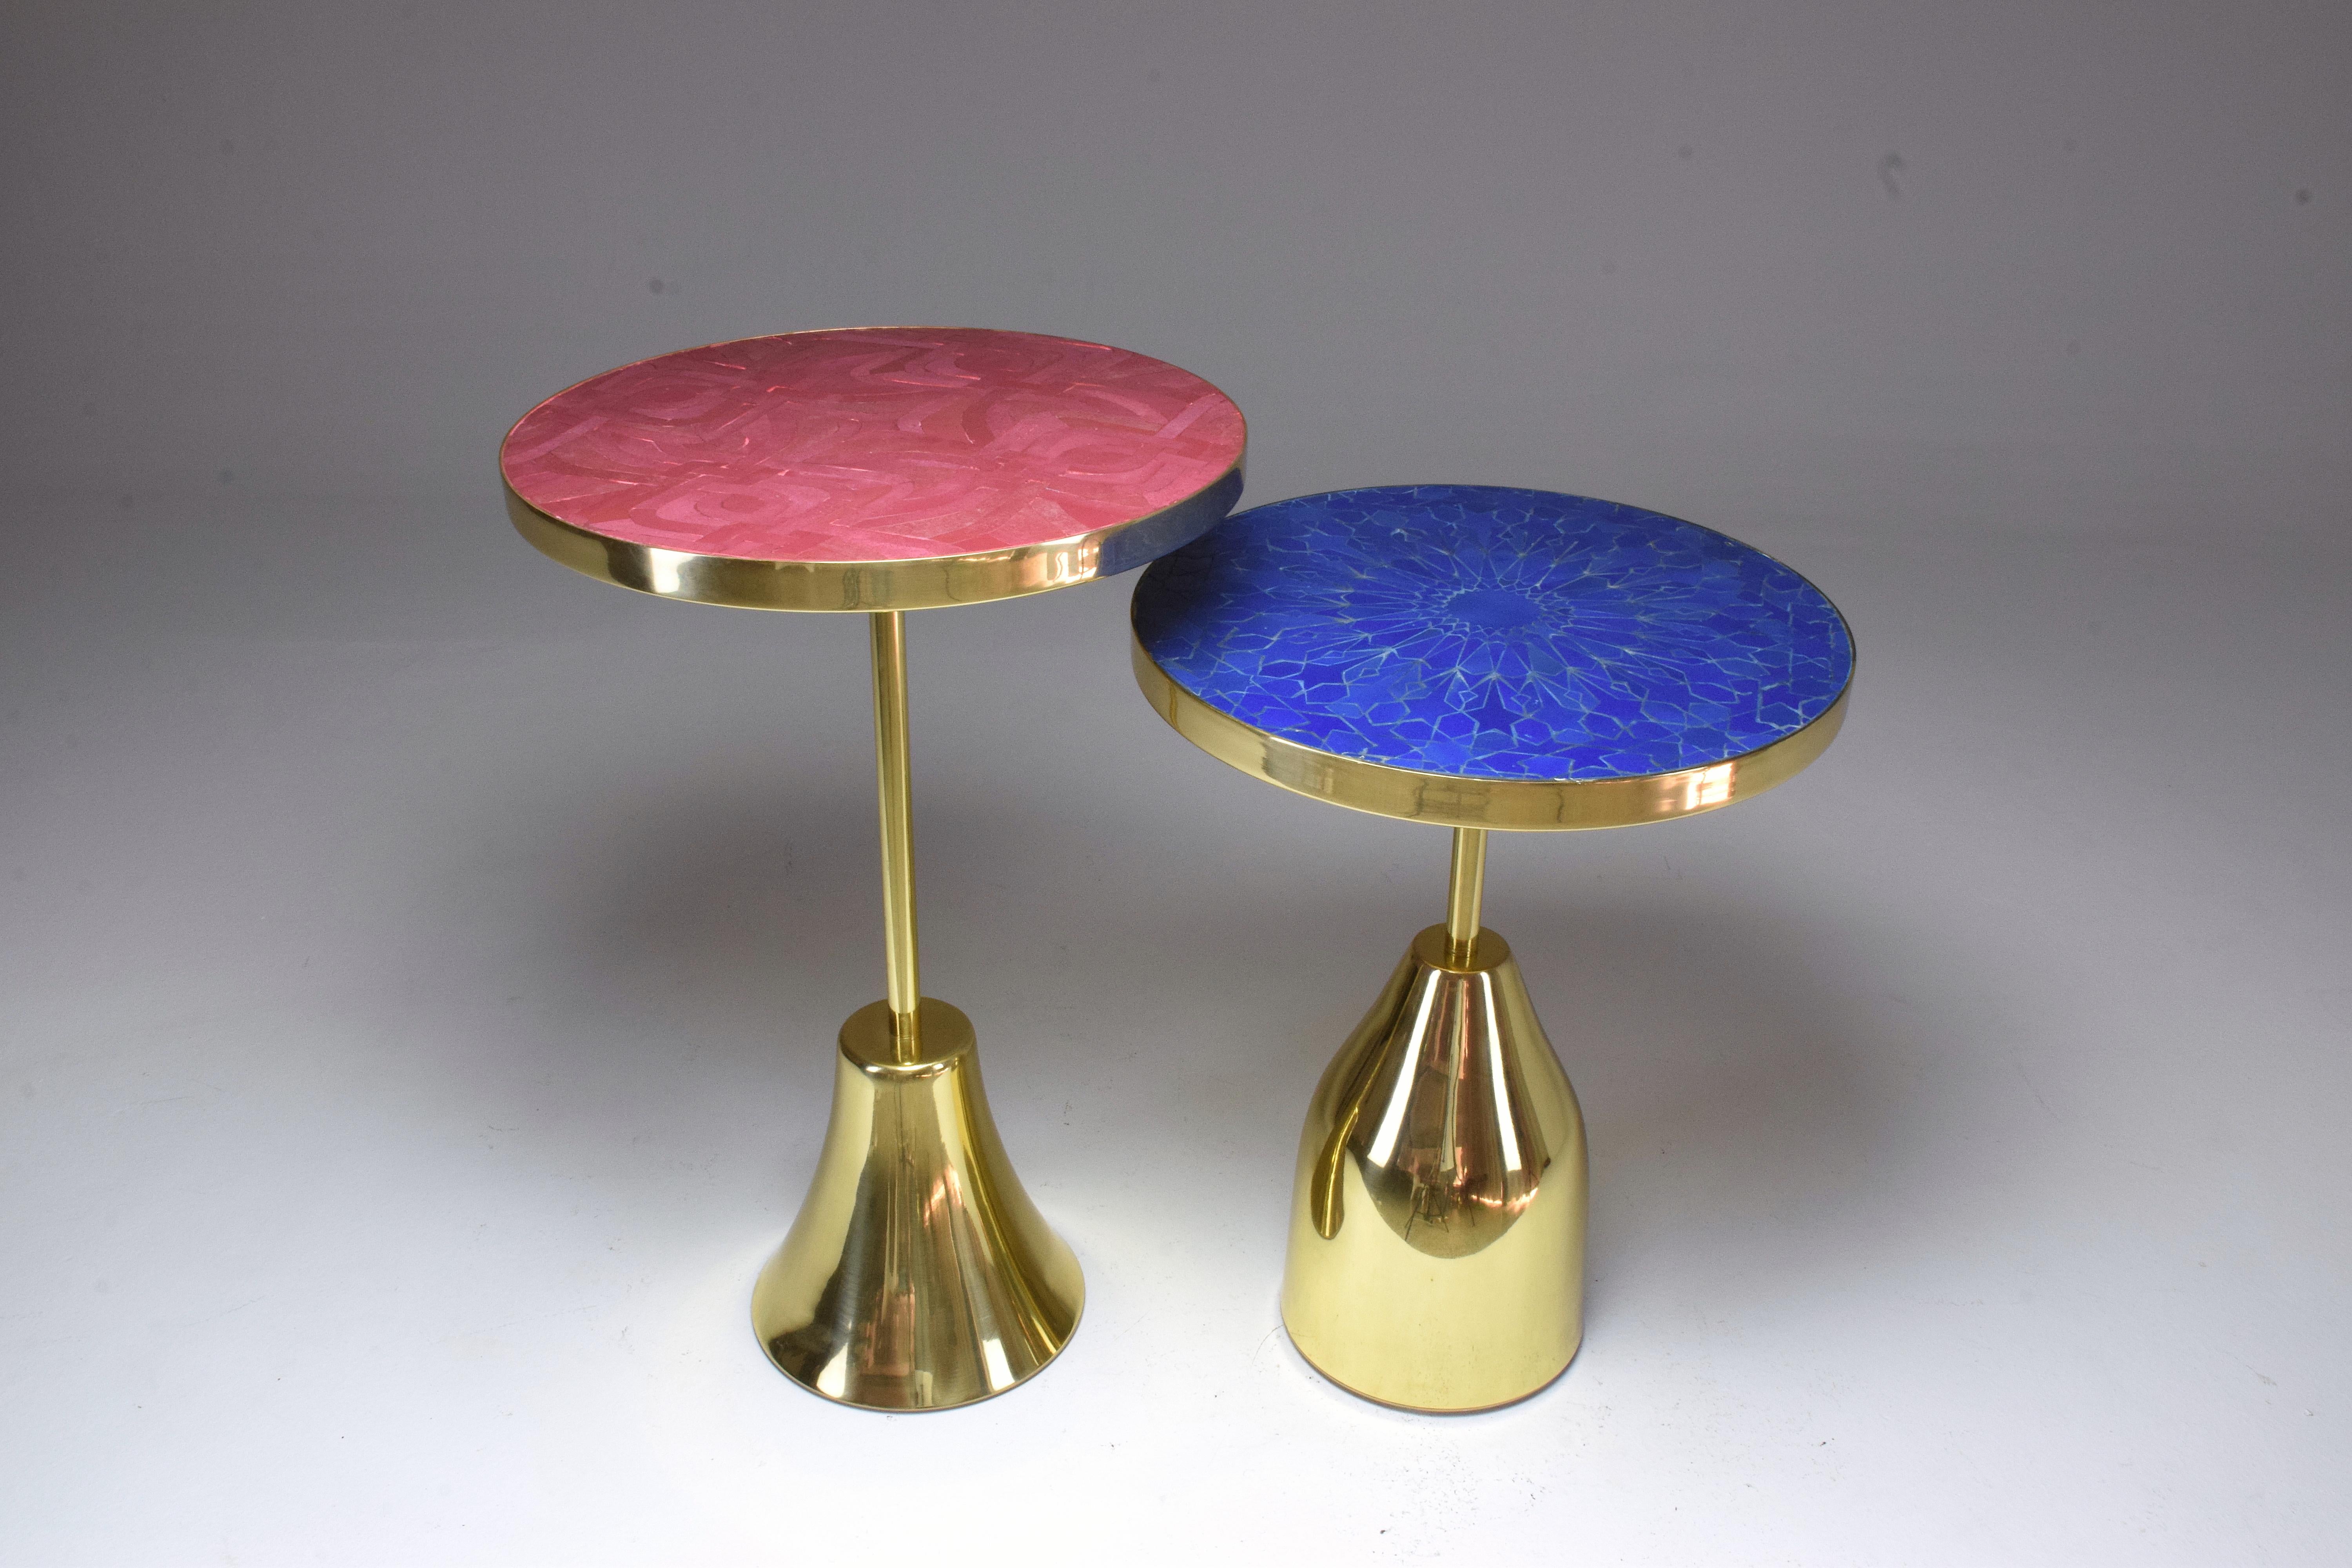 Contemporary handcrafted guéridon side or nesting table composed of a solid brass structure and designed with an intricate red mosaic tile tabletop in a modern graphic zellige design. 

Various dimensions, heights, colours, patterns and bases are